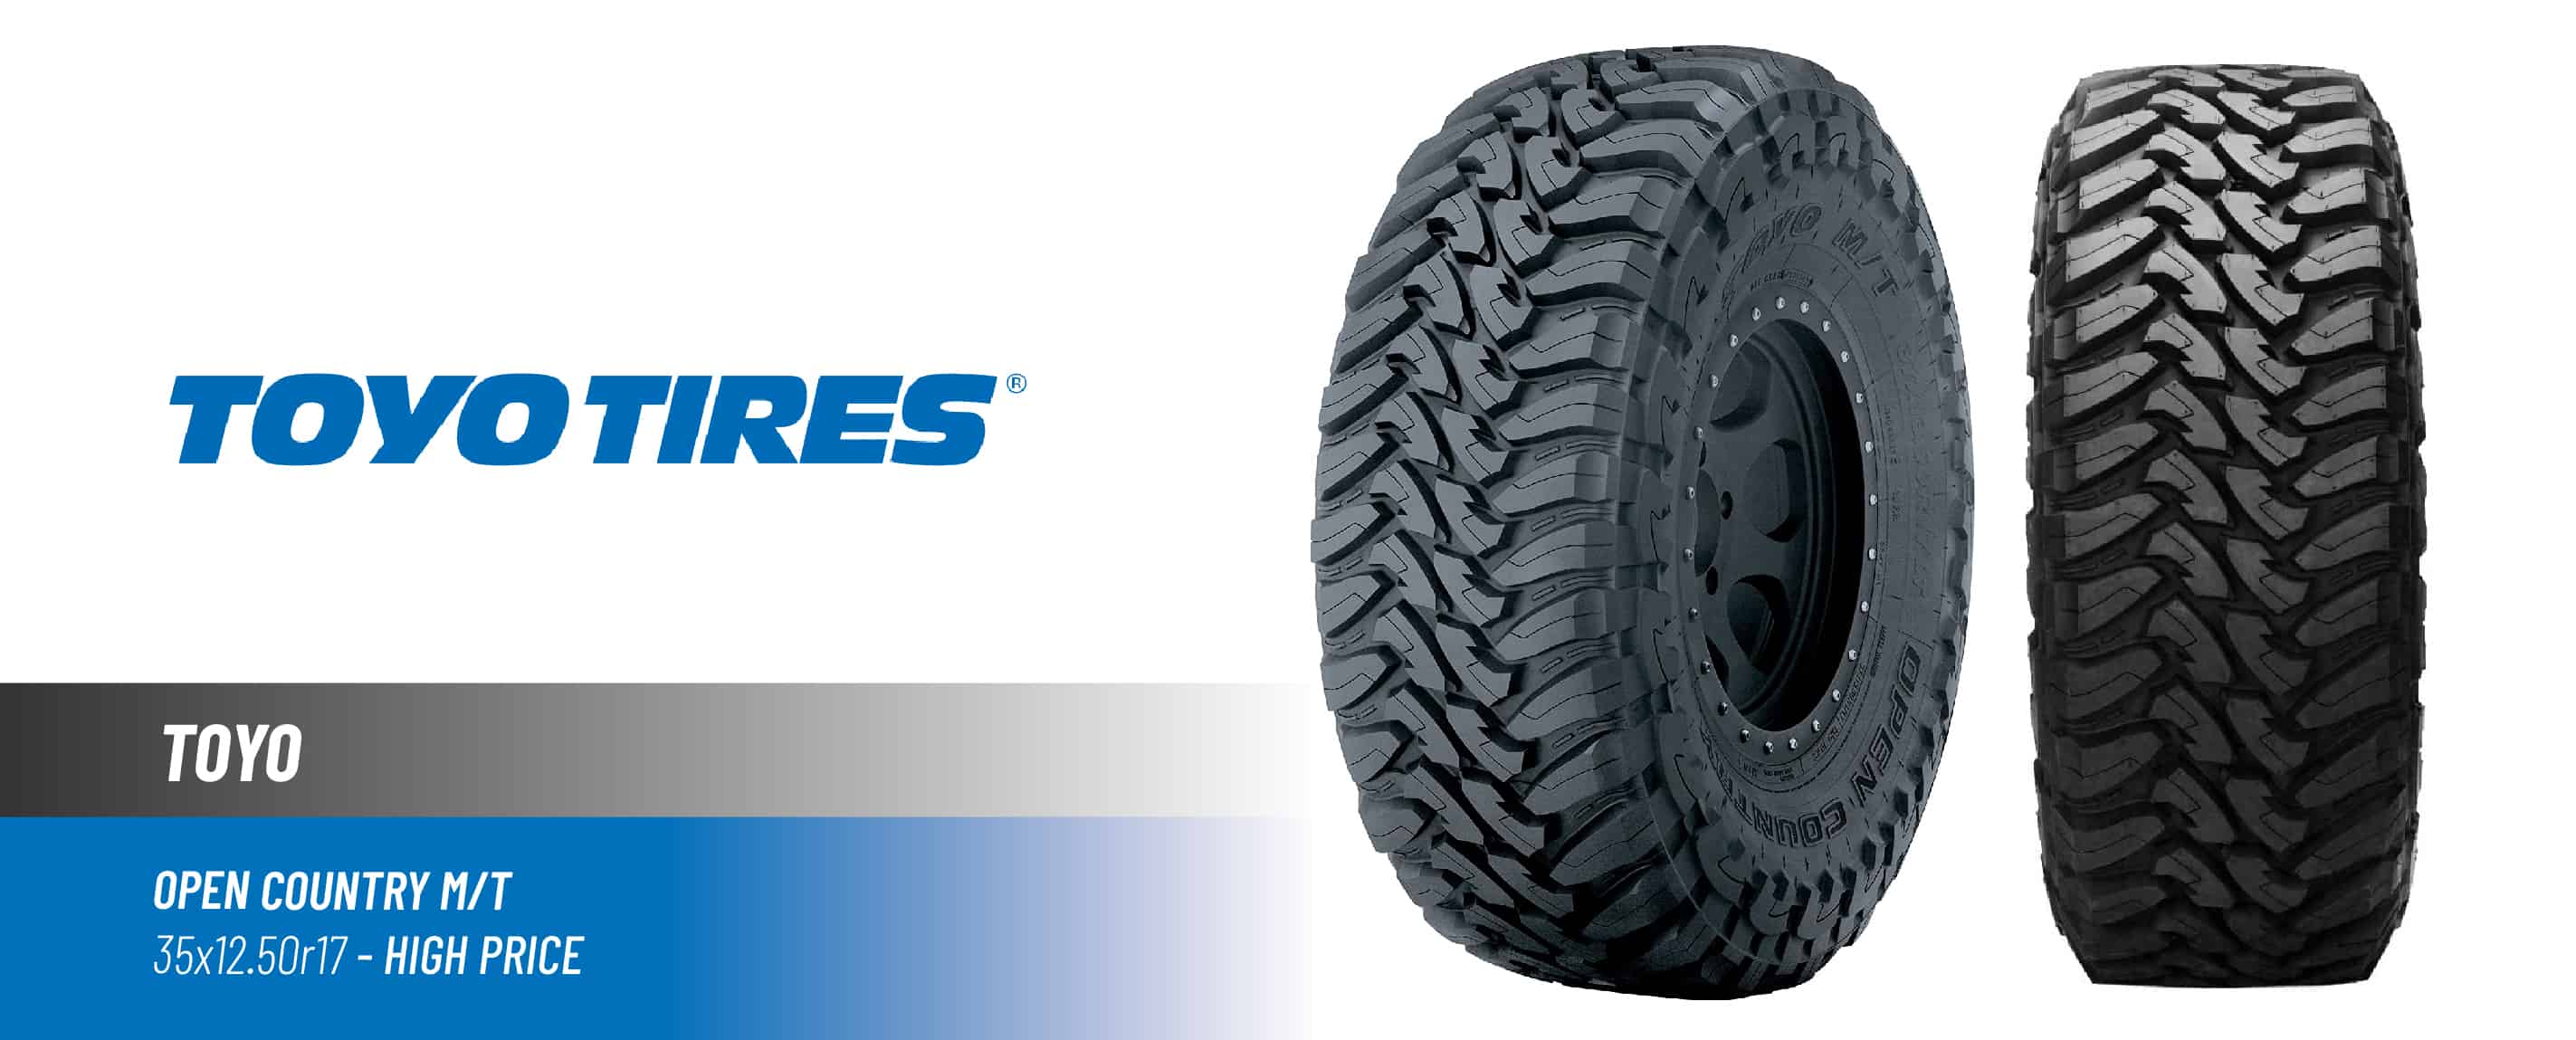 Top#1 High Price: Toyo Open Country M/T – best 35x12.50 r17